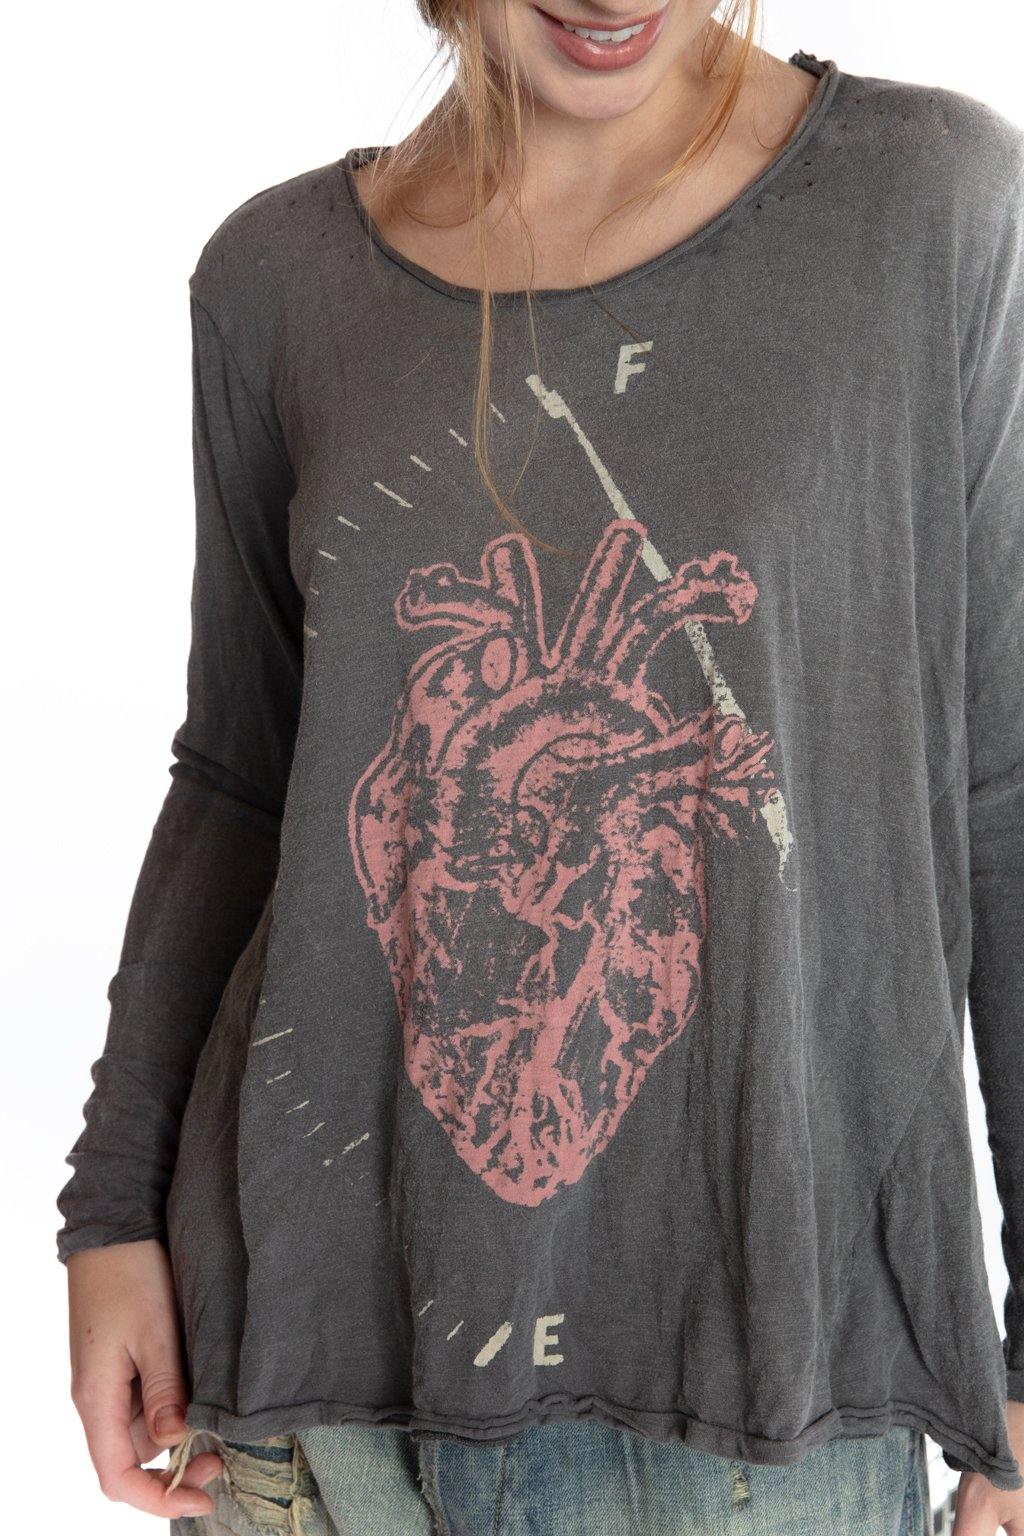 Full Heart Dylan T - Magnolia Pearl Clothing